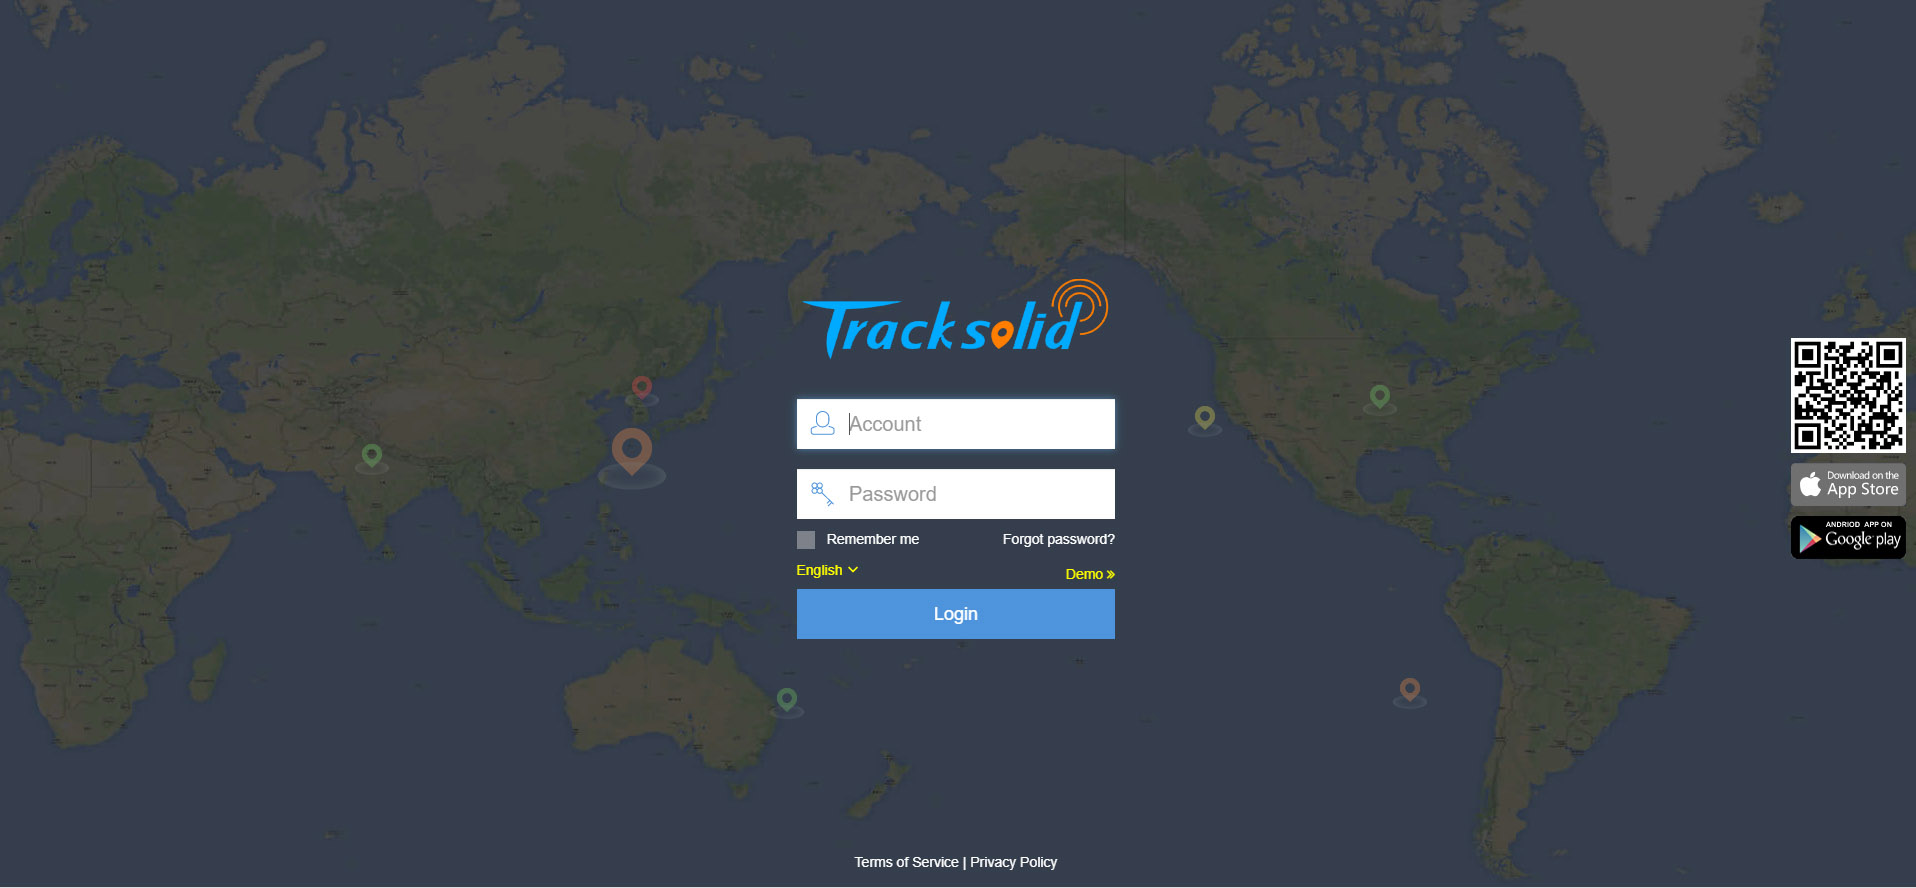 gps-tracking tracksolid app-software